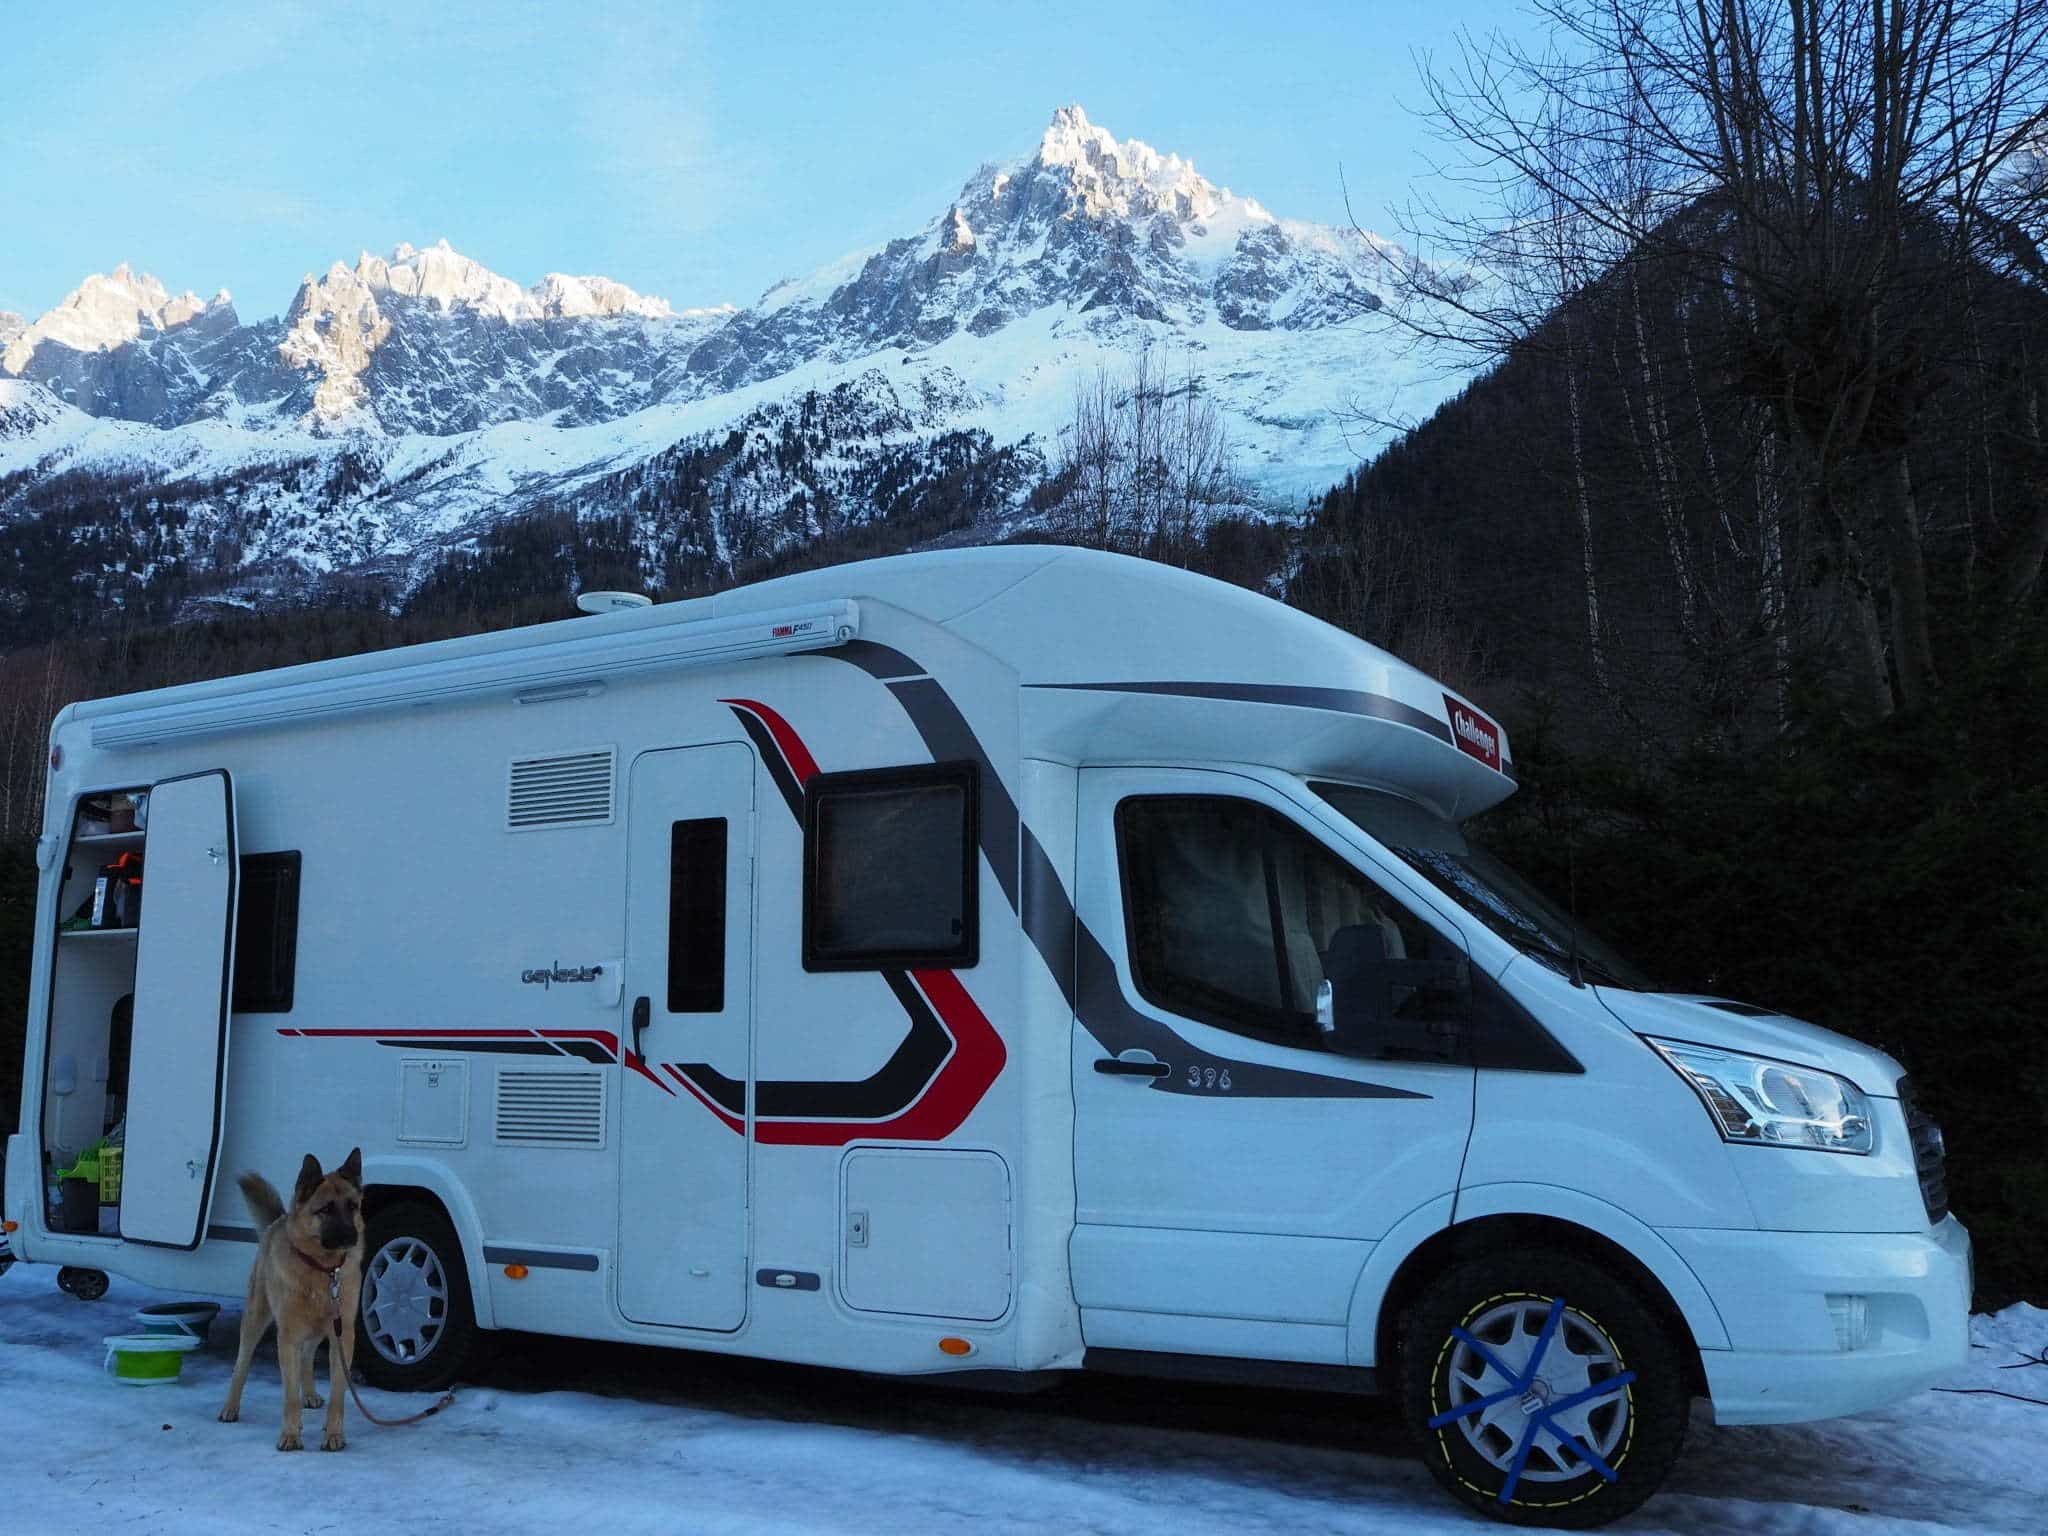 Traveling by motorhome